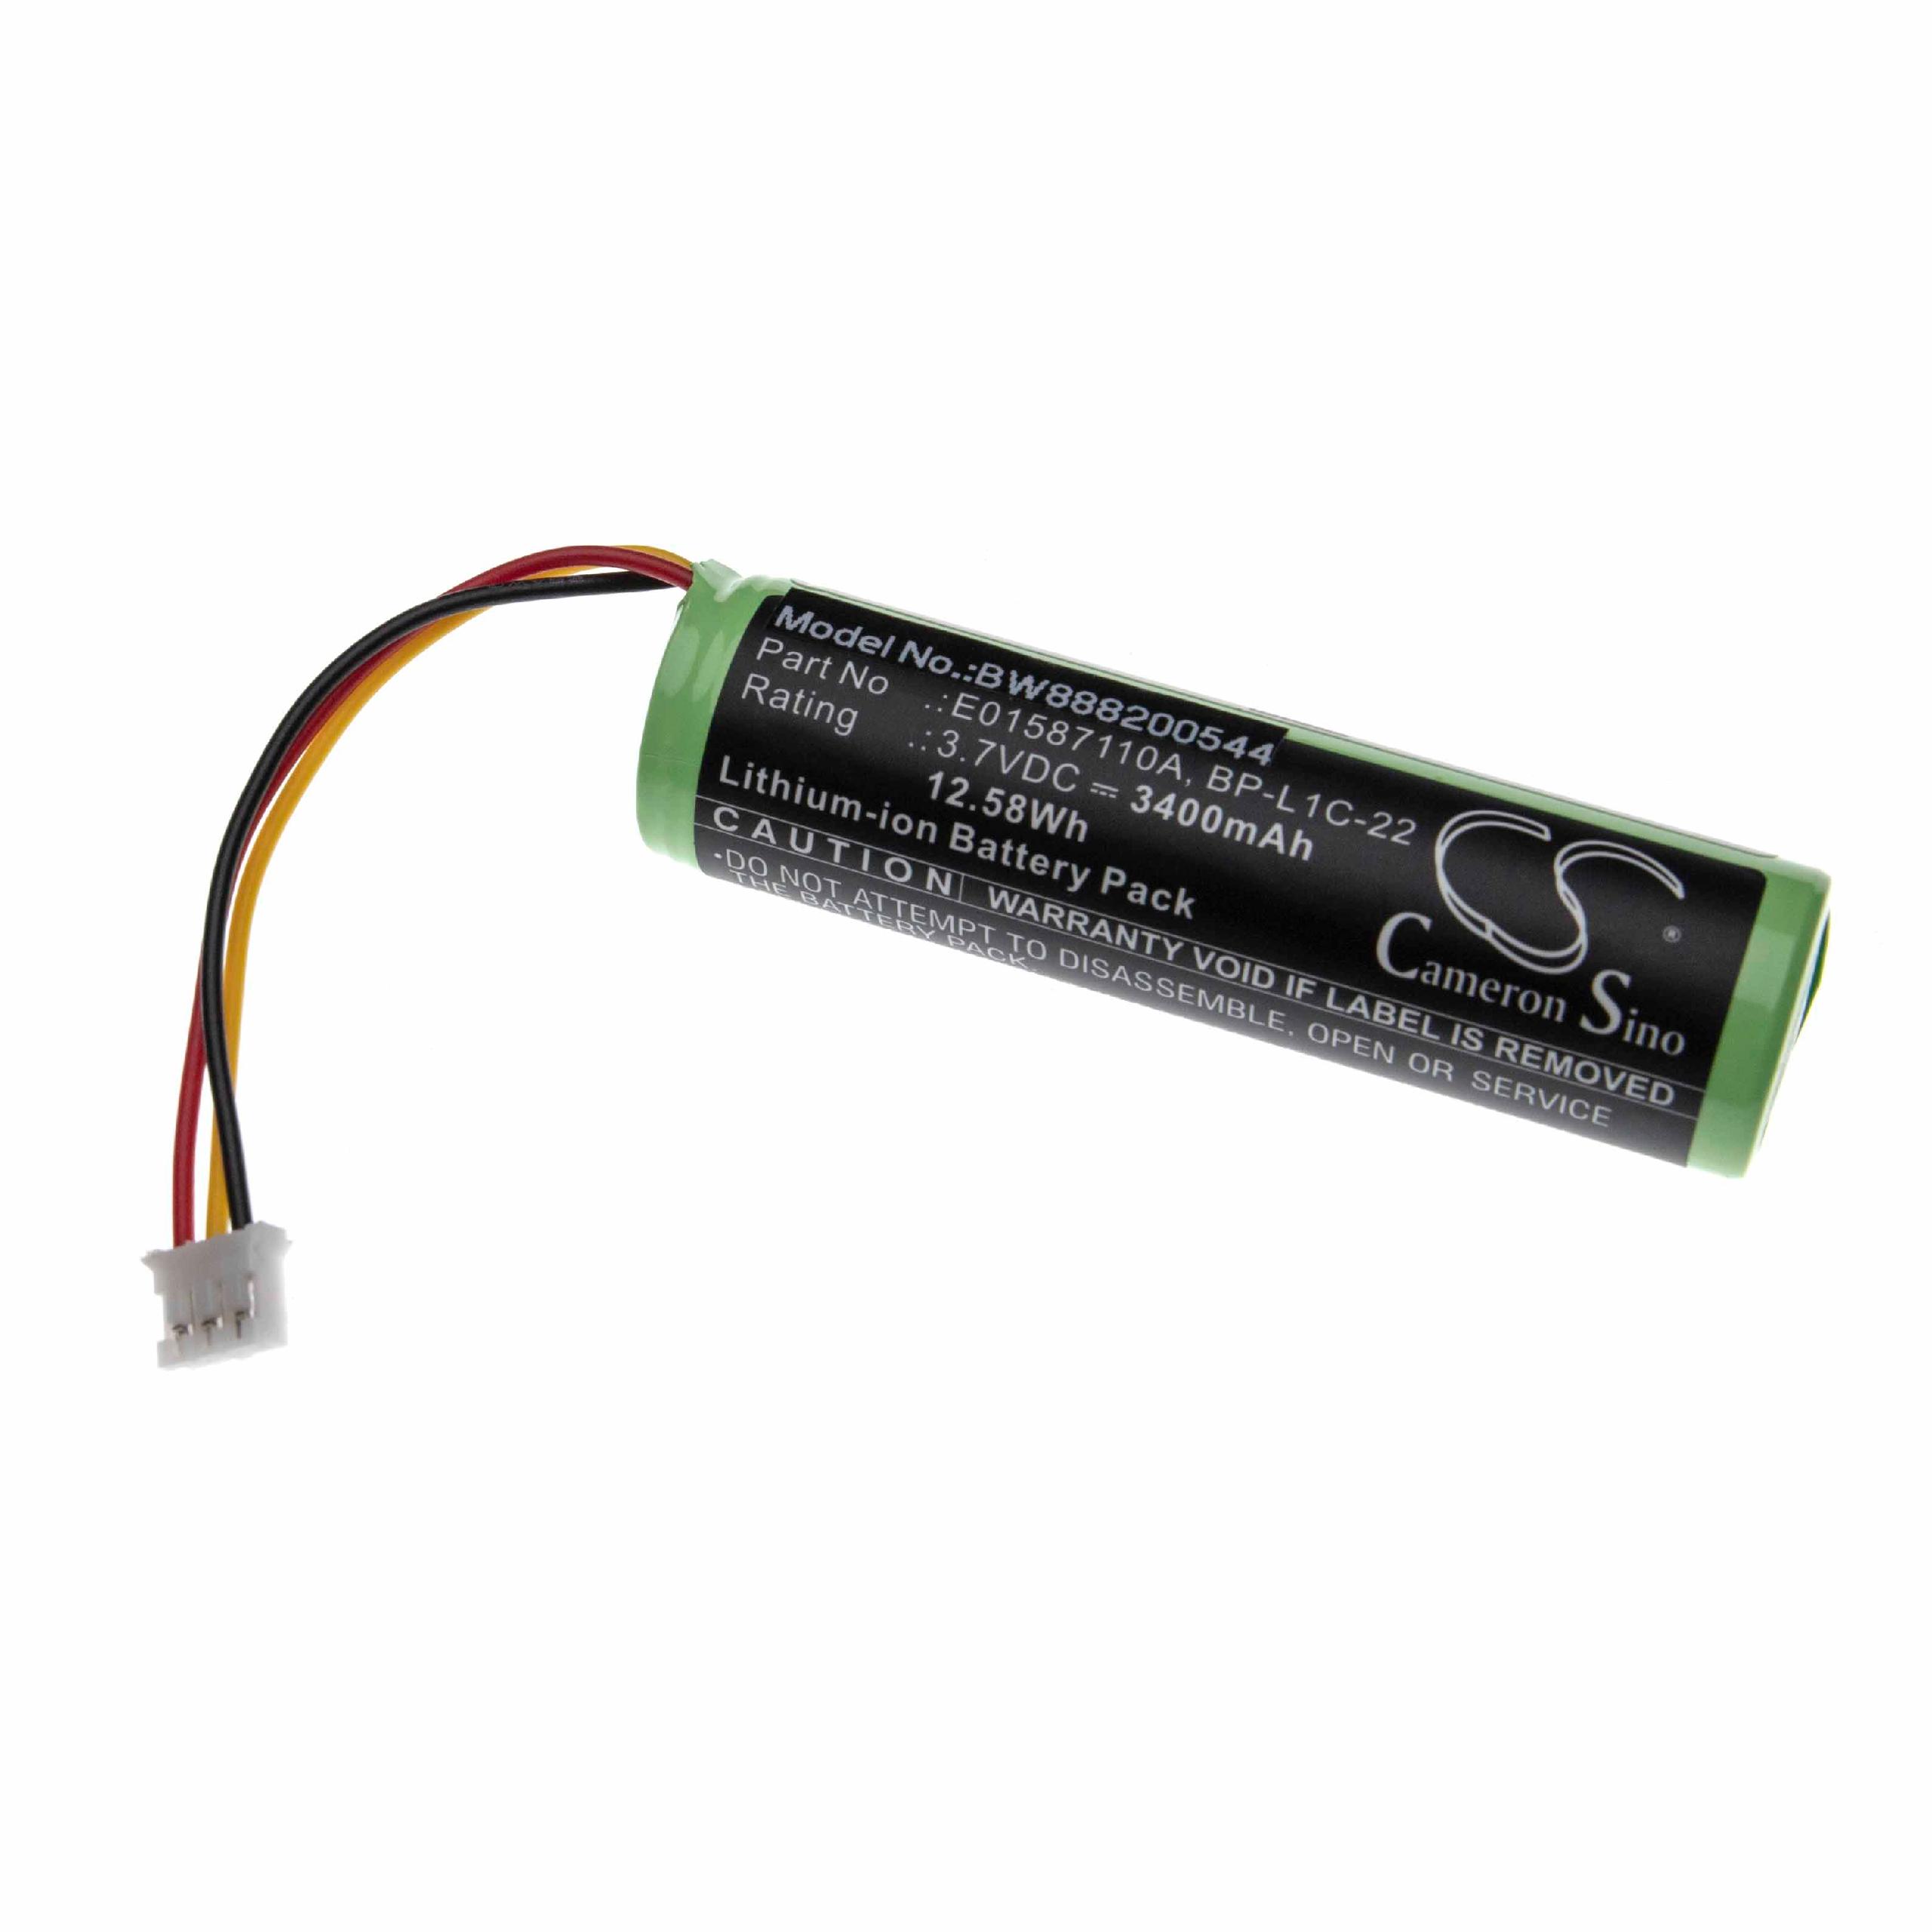 MP3-Player Battery Replacement for Tascam E01587110A, BP-L1C-22 - 3400mAh 3.7V Li-Ion